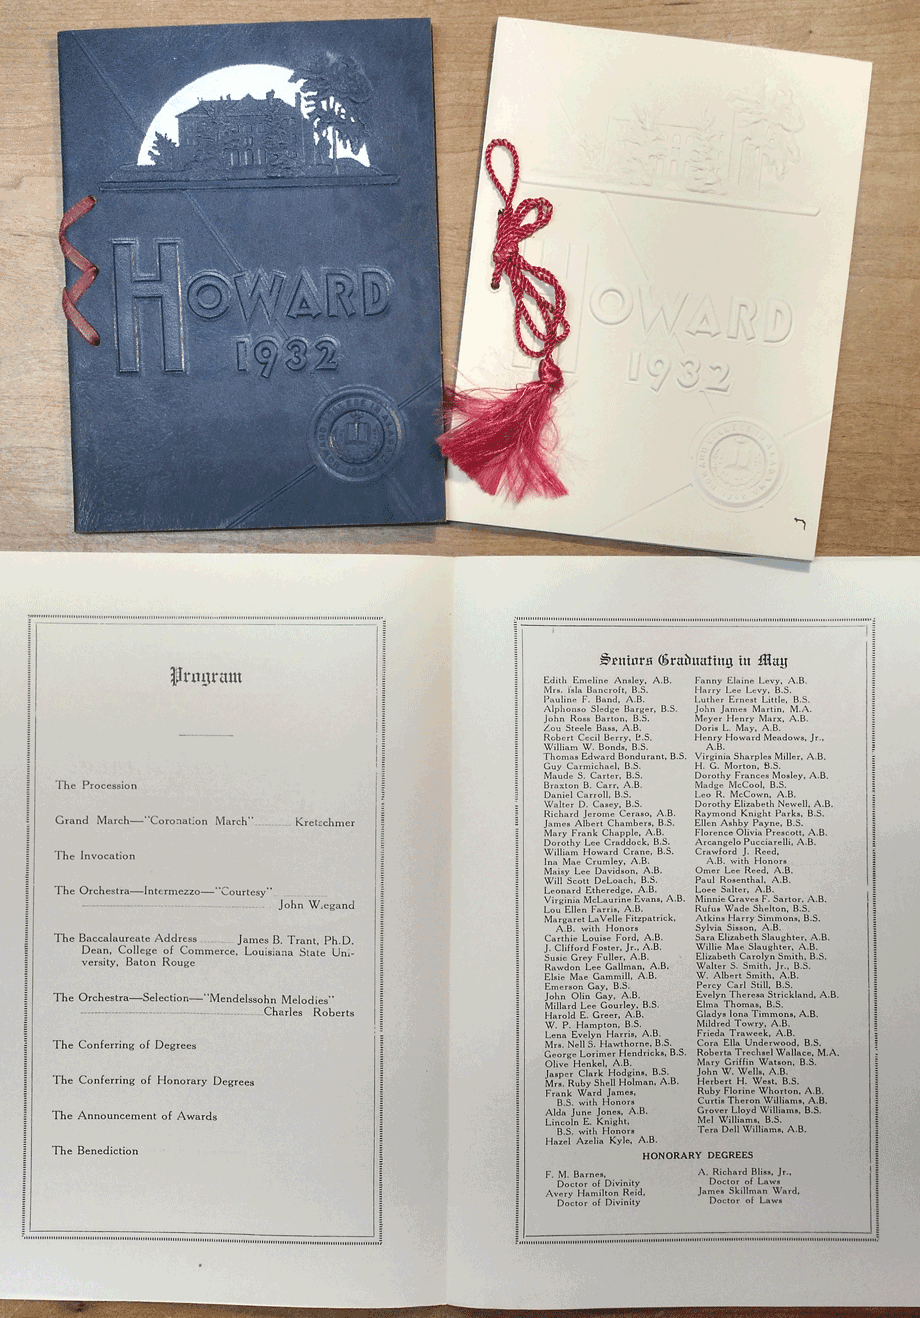 Commencement blue leather and white paper invitations for 1932